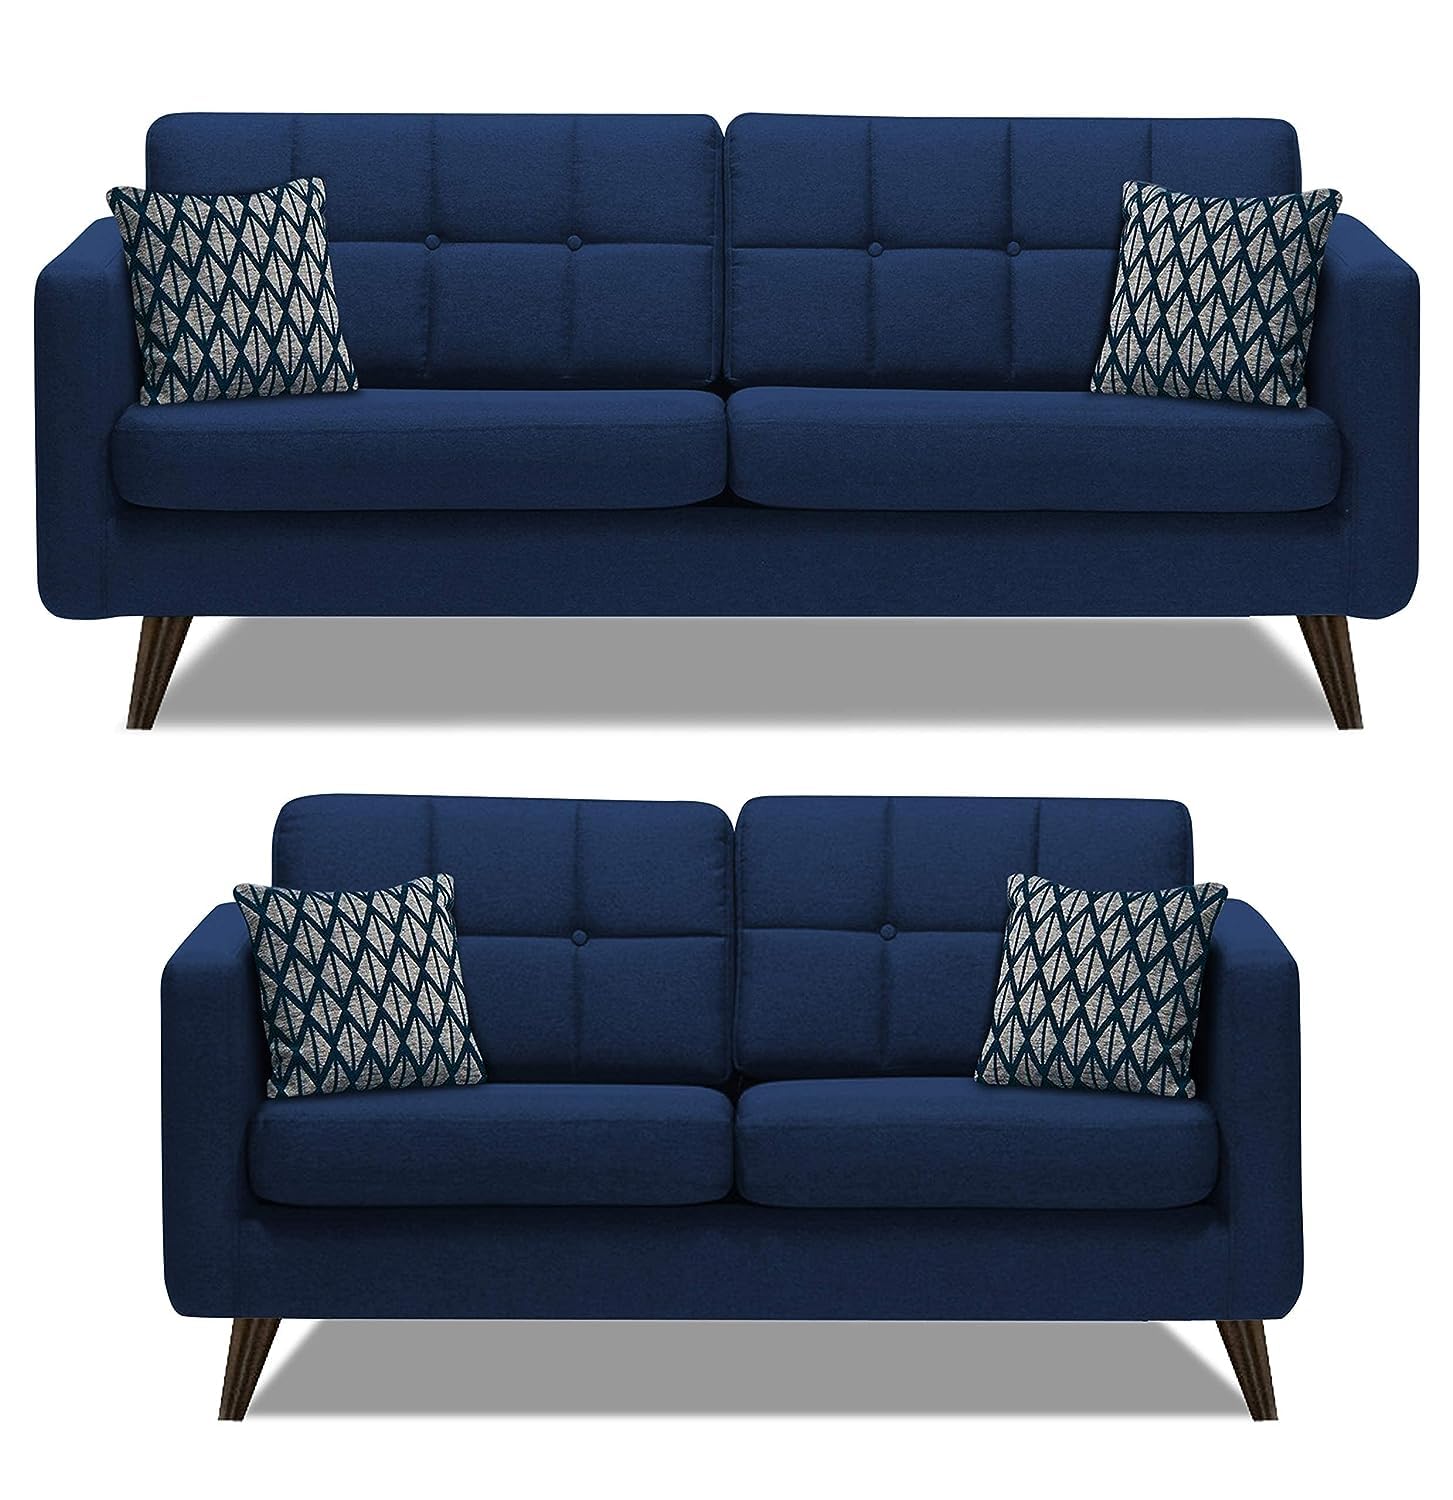 Dario Fabric Sofa Collection For Living Room | Bedroom | Office - Torque India